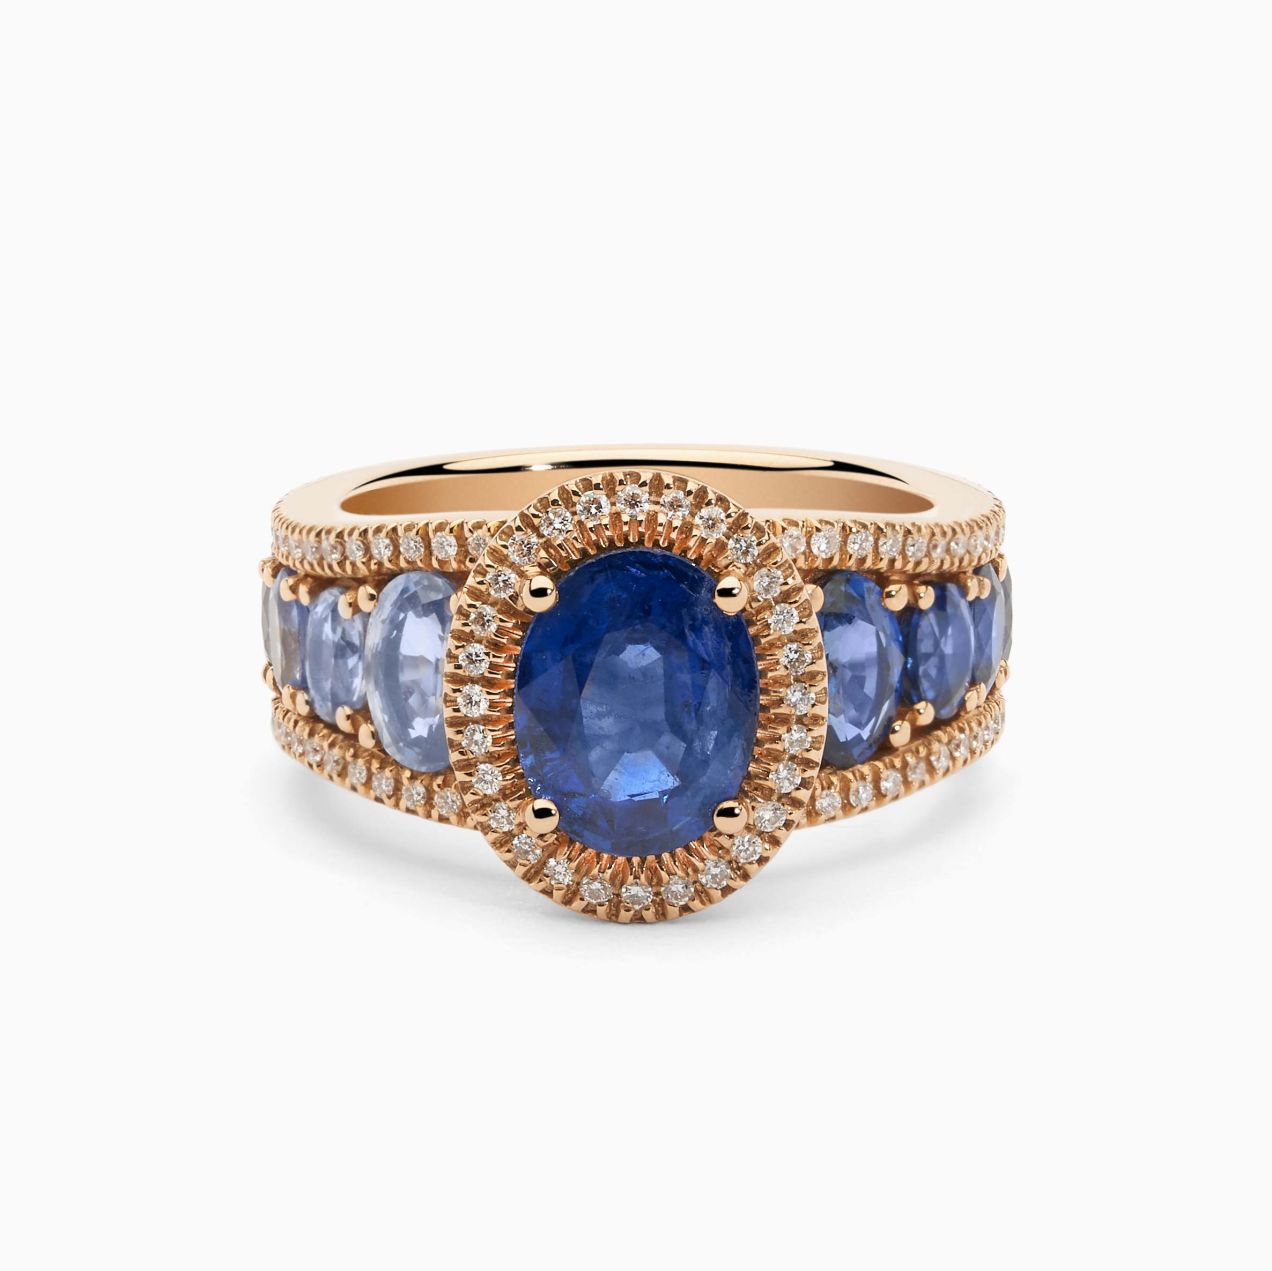 Solitaire ring in rose gold with central blue sapphire